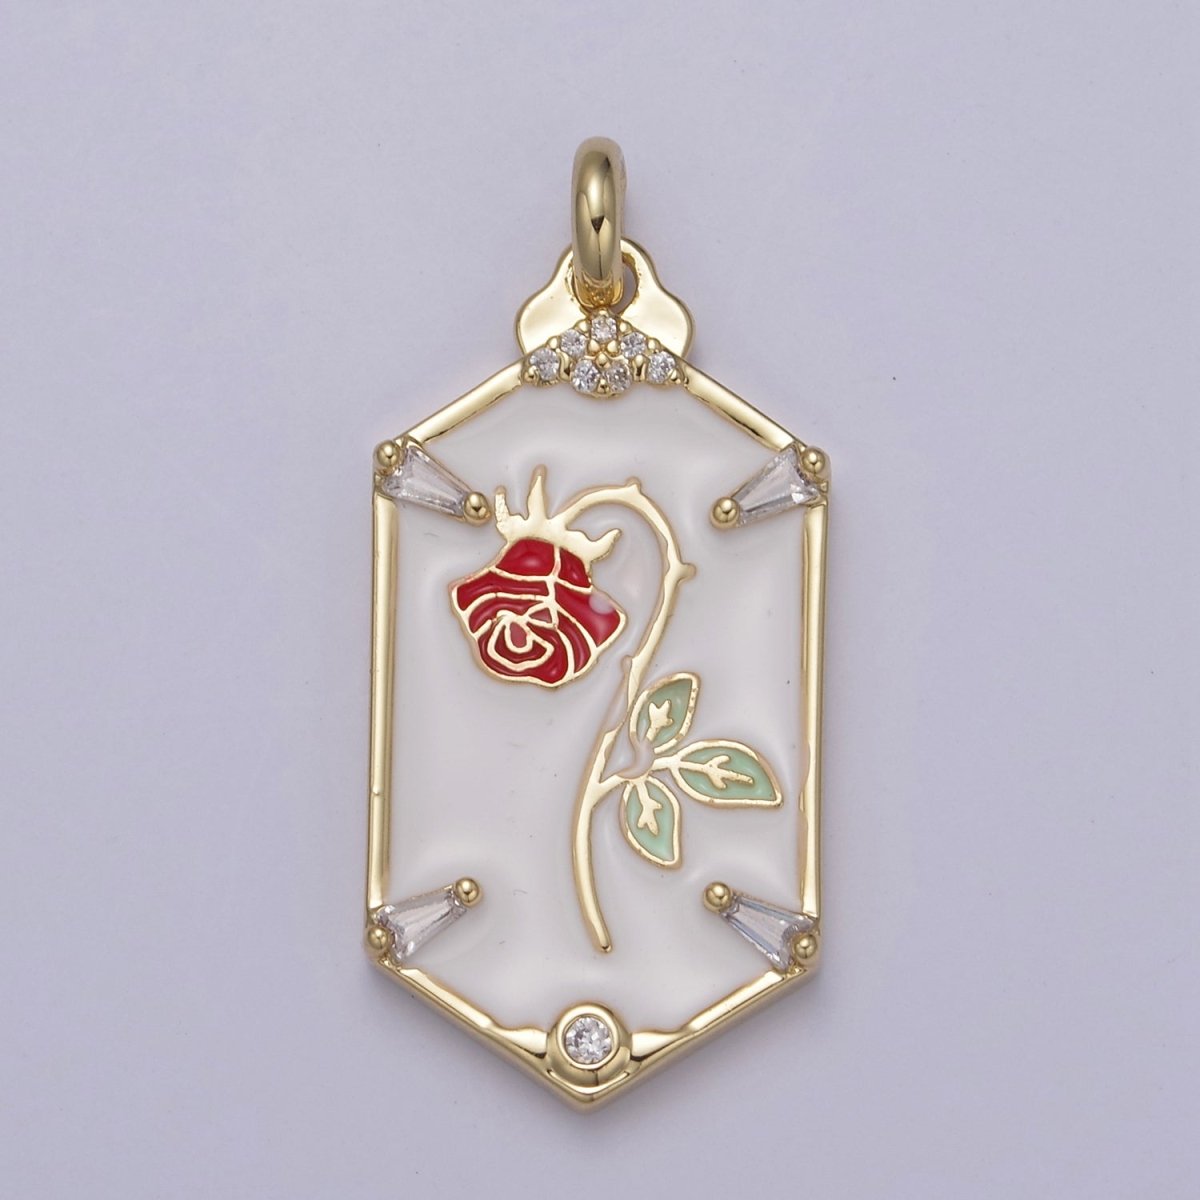 Dainty Red Rose Charm Necklace, 14K Gold Filled Flower necklace Pendant Belle beauty and the beast Jewelry Inspired Hexagon Tag Dangle Charm N-759 N-761 - DLUXCA